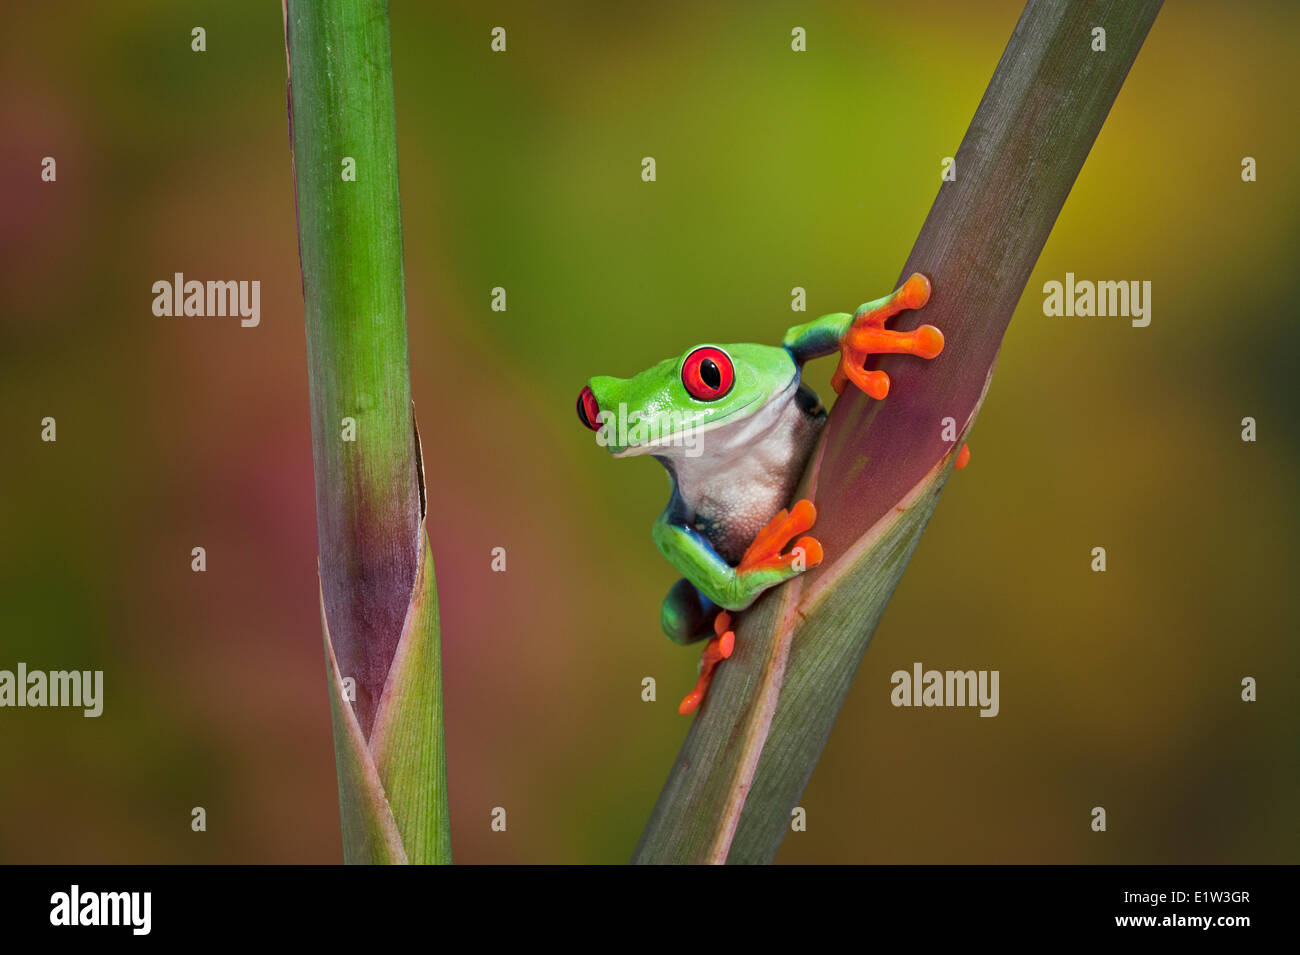 Red-eyed Tree Frog (Agalychnis callidryas) making direct eye contact while holding onto colorful tropical flower. Native to Stock Photo